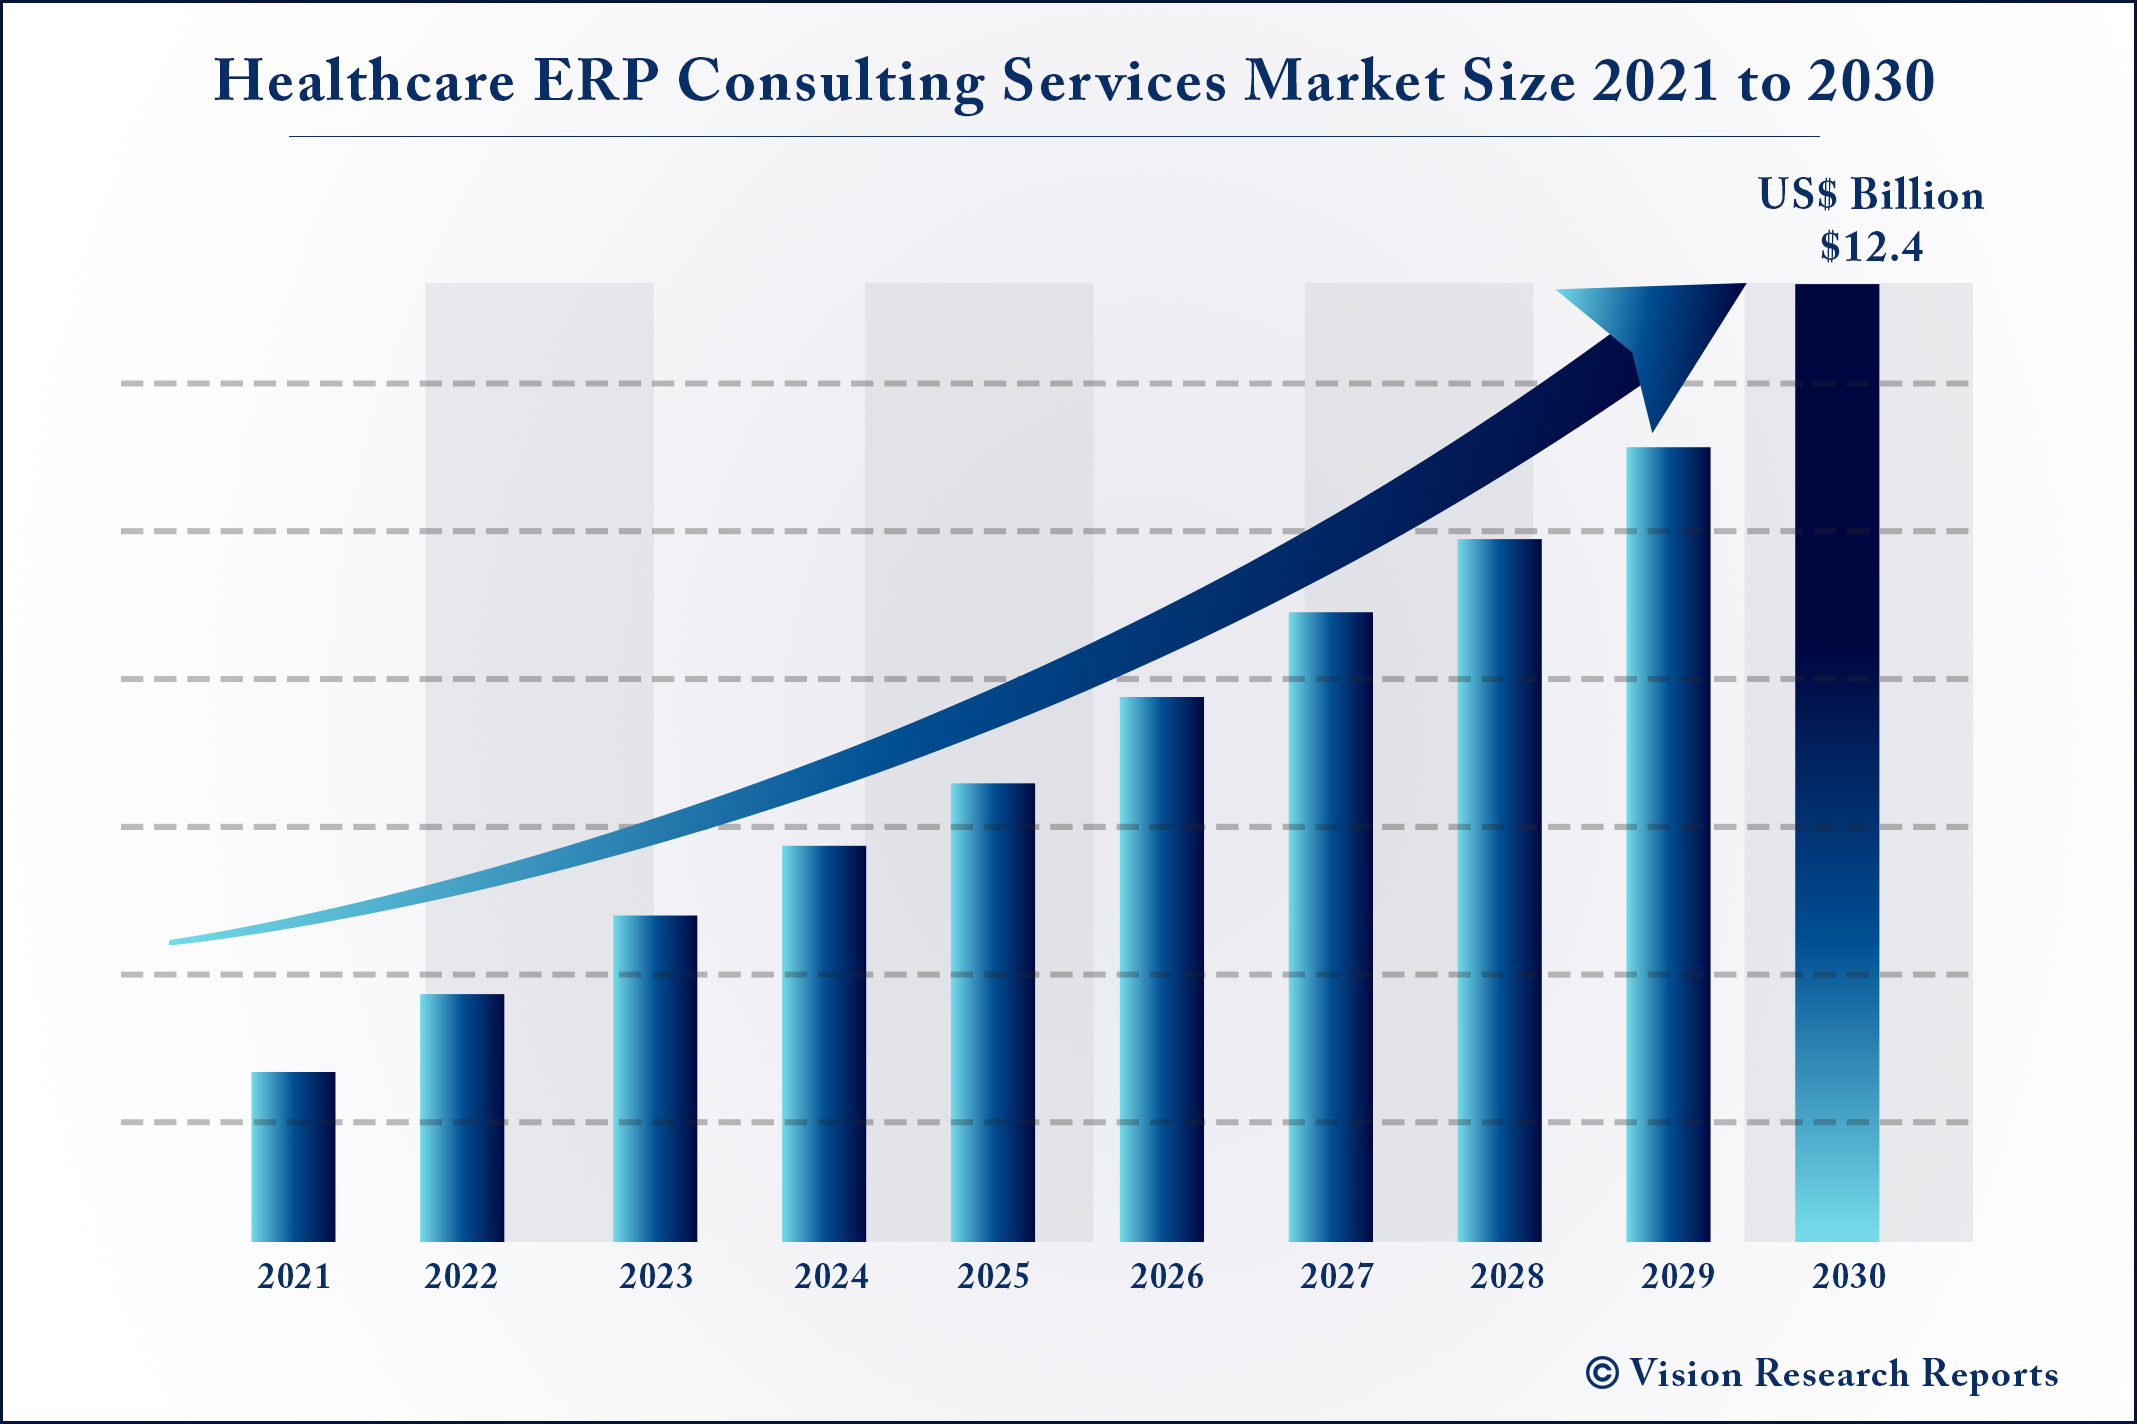 Healthcare ERP Consulting Services Market Size 2021 to 2030